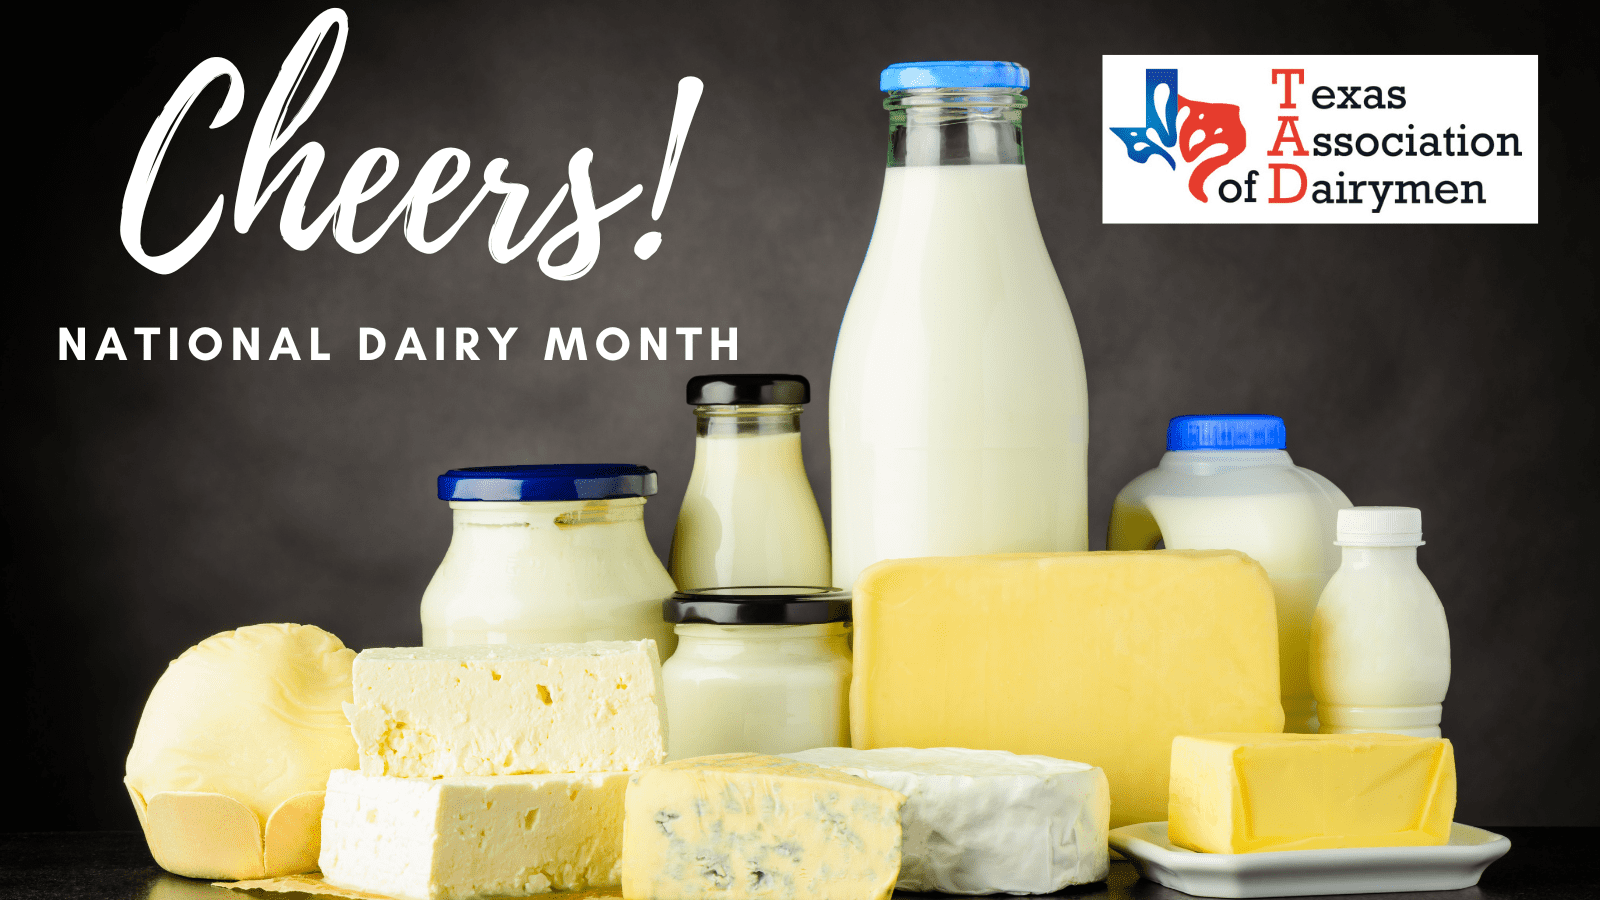 National Dairy Month 2023: Every Texan can – and should – enjoy the abundance of dairy